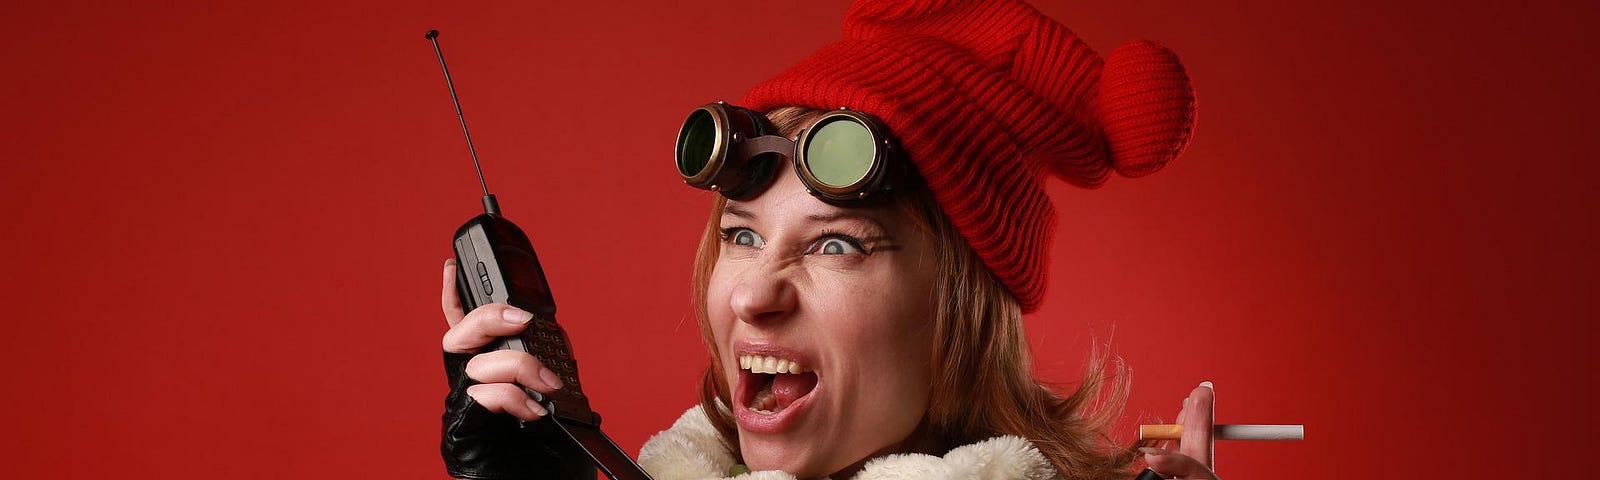 A woman wearing a green winter jacket and a too-small kid’s winter hat is wearing driver’s gloves and vintage motorcycle goggles. She holds a walkie-talkie in her right hand and a cigarette in her left. She has a crazy expression.